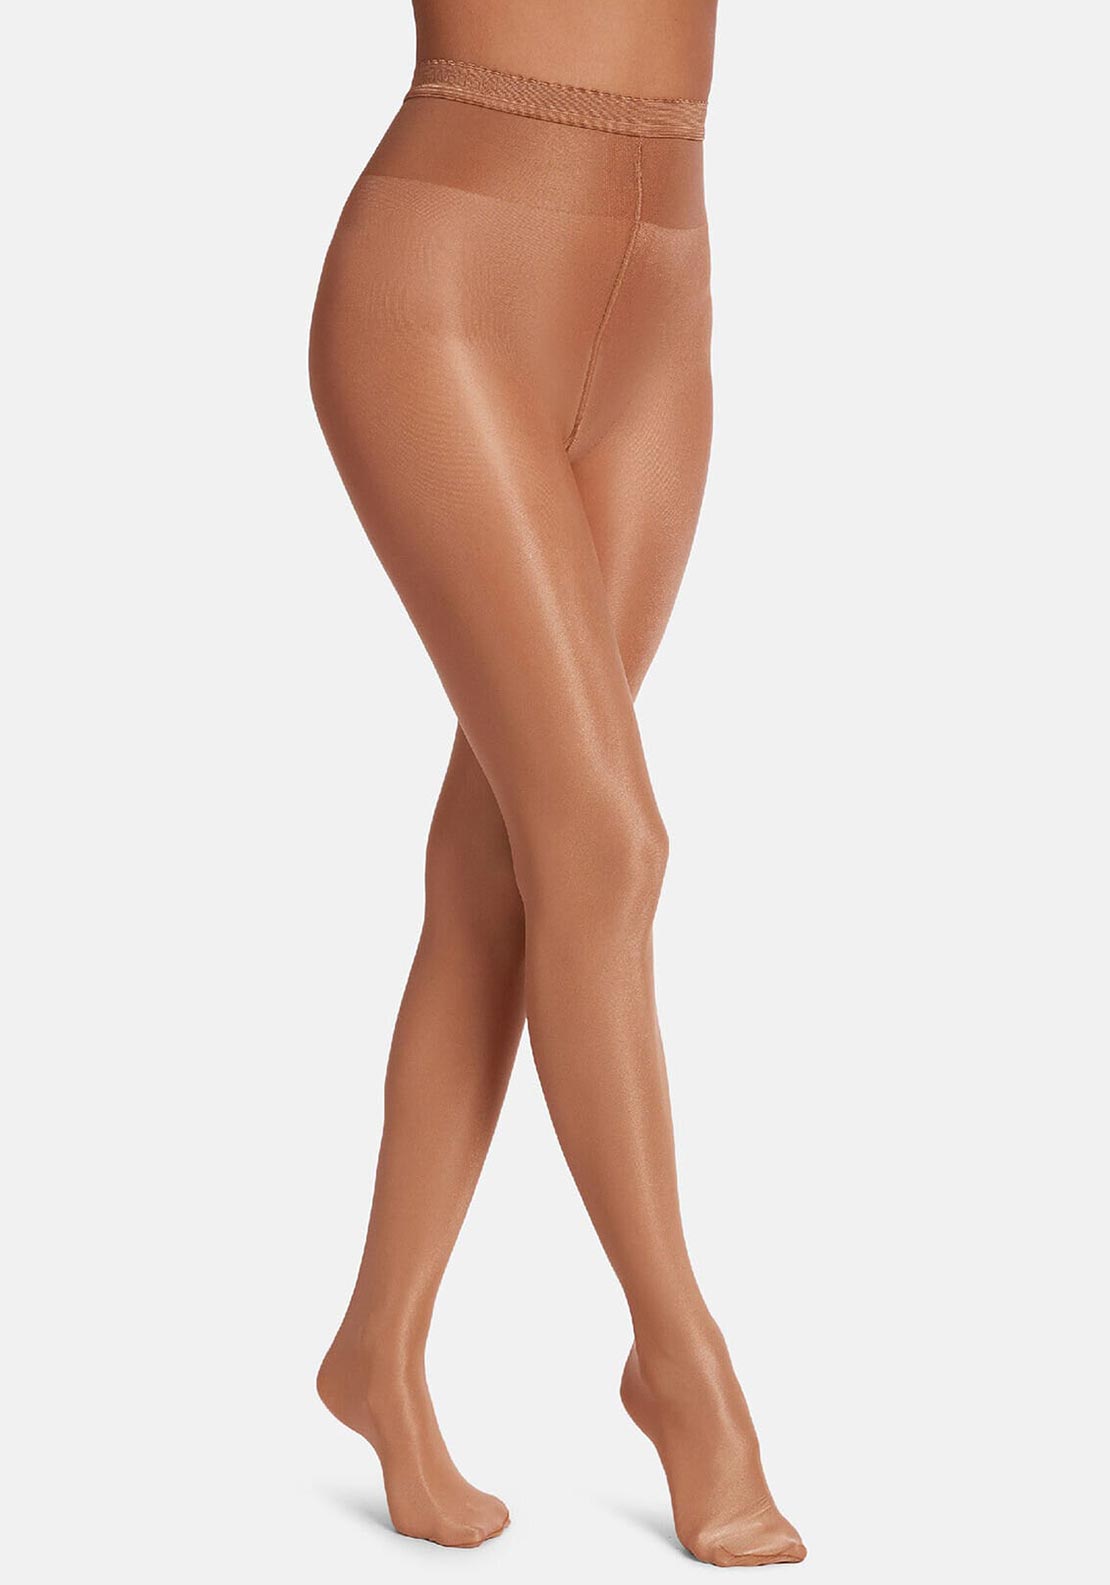 Wolford Neon 40 Tights Set - Black